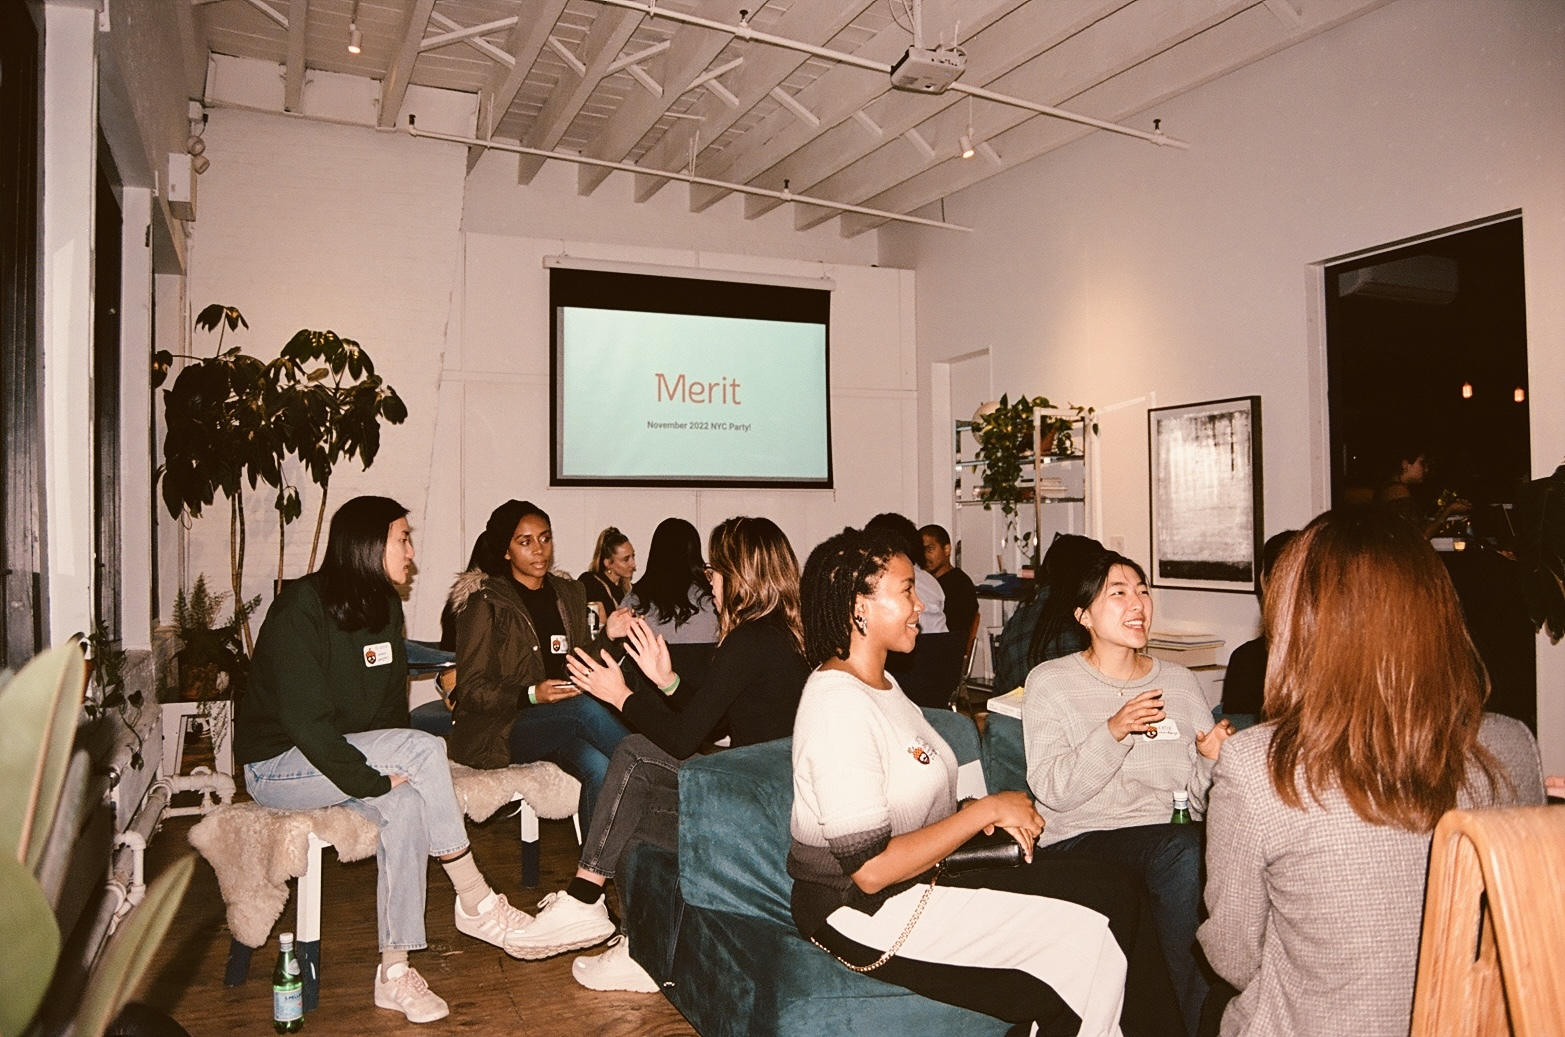 A candid photograph of groups of people talking in an event space.